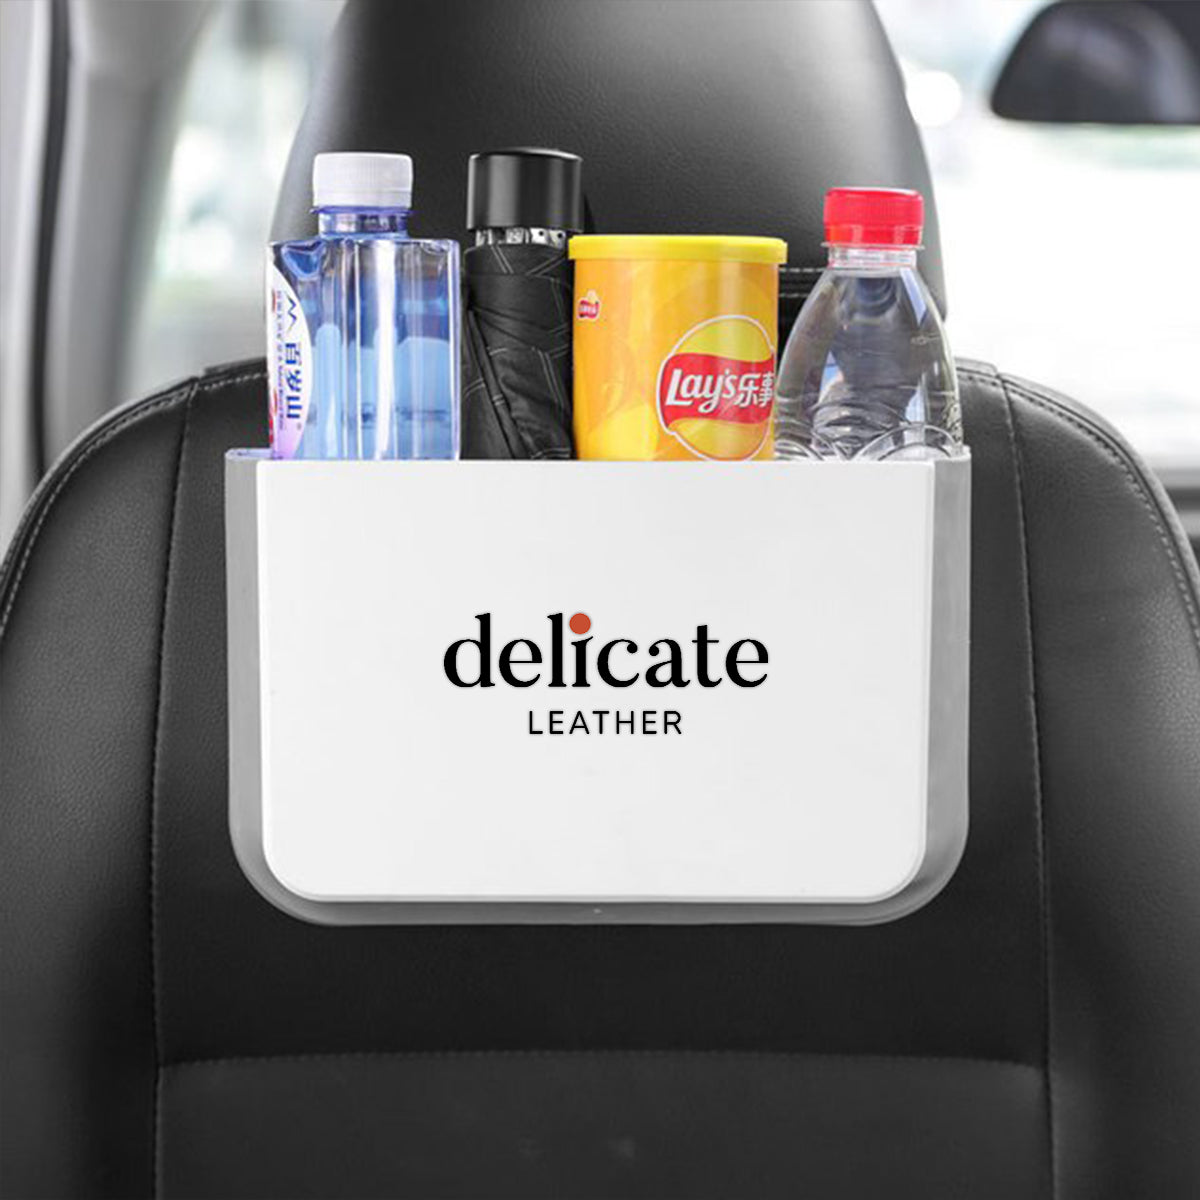 Hanging Waterproof Car Trash can-Foldable, Custom For Your Cars, Waterproof, and Equipped with Cup Holders and Trays. Multi-Purpose, Car Accessories KO11992 - Delicate Leather